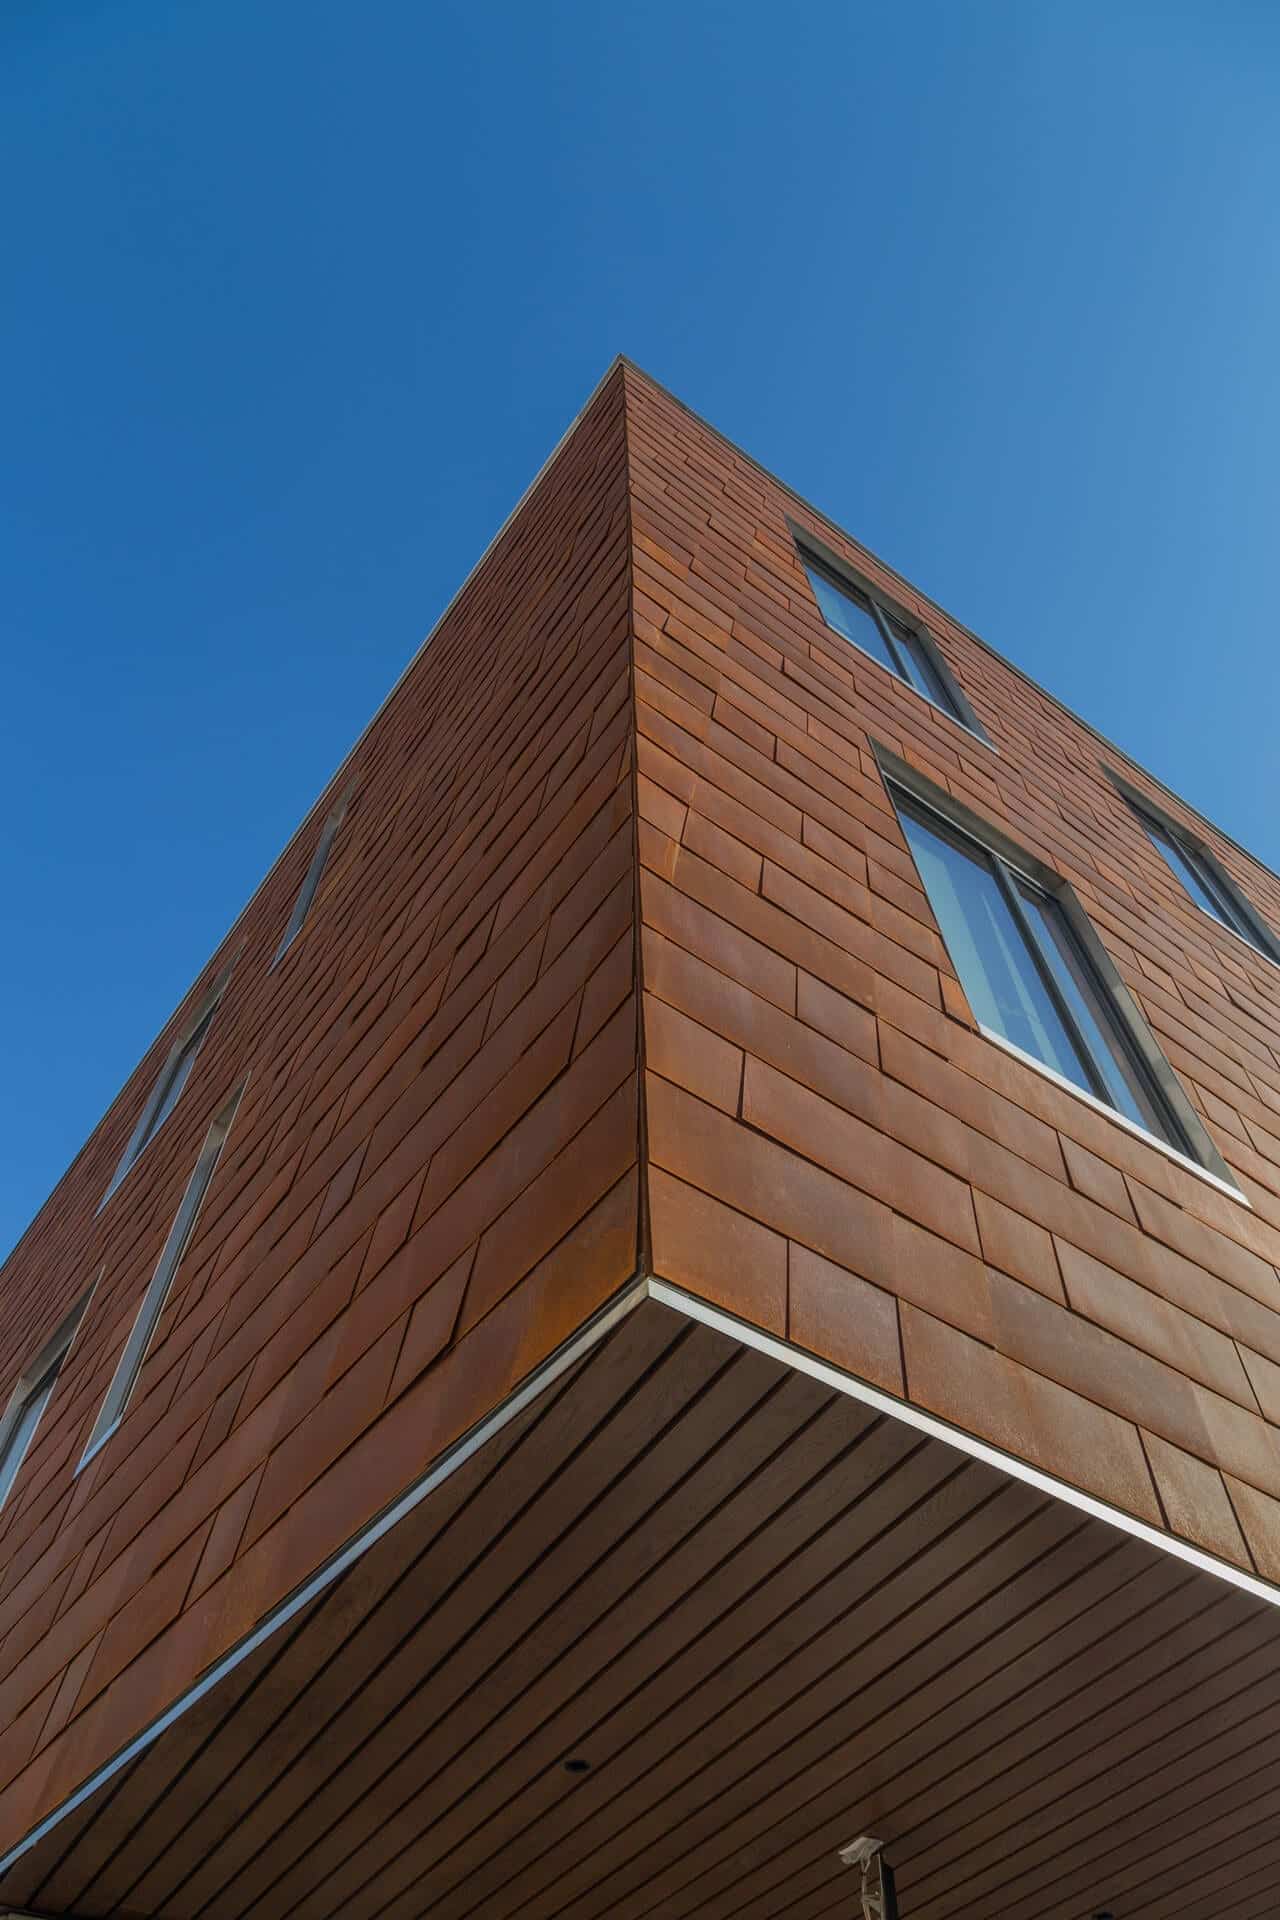 BROWN UNIVERSITY APPLIED MATH BUILDING, CLAD IN ZAHNER SOLANUM WEATHERING STEEL.